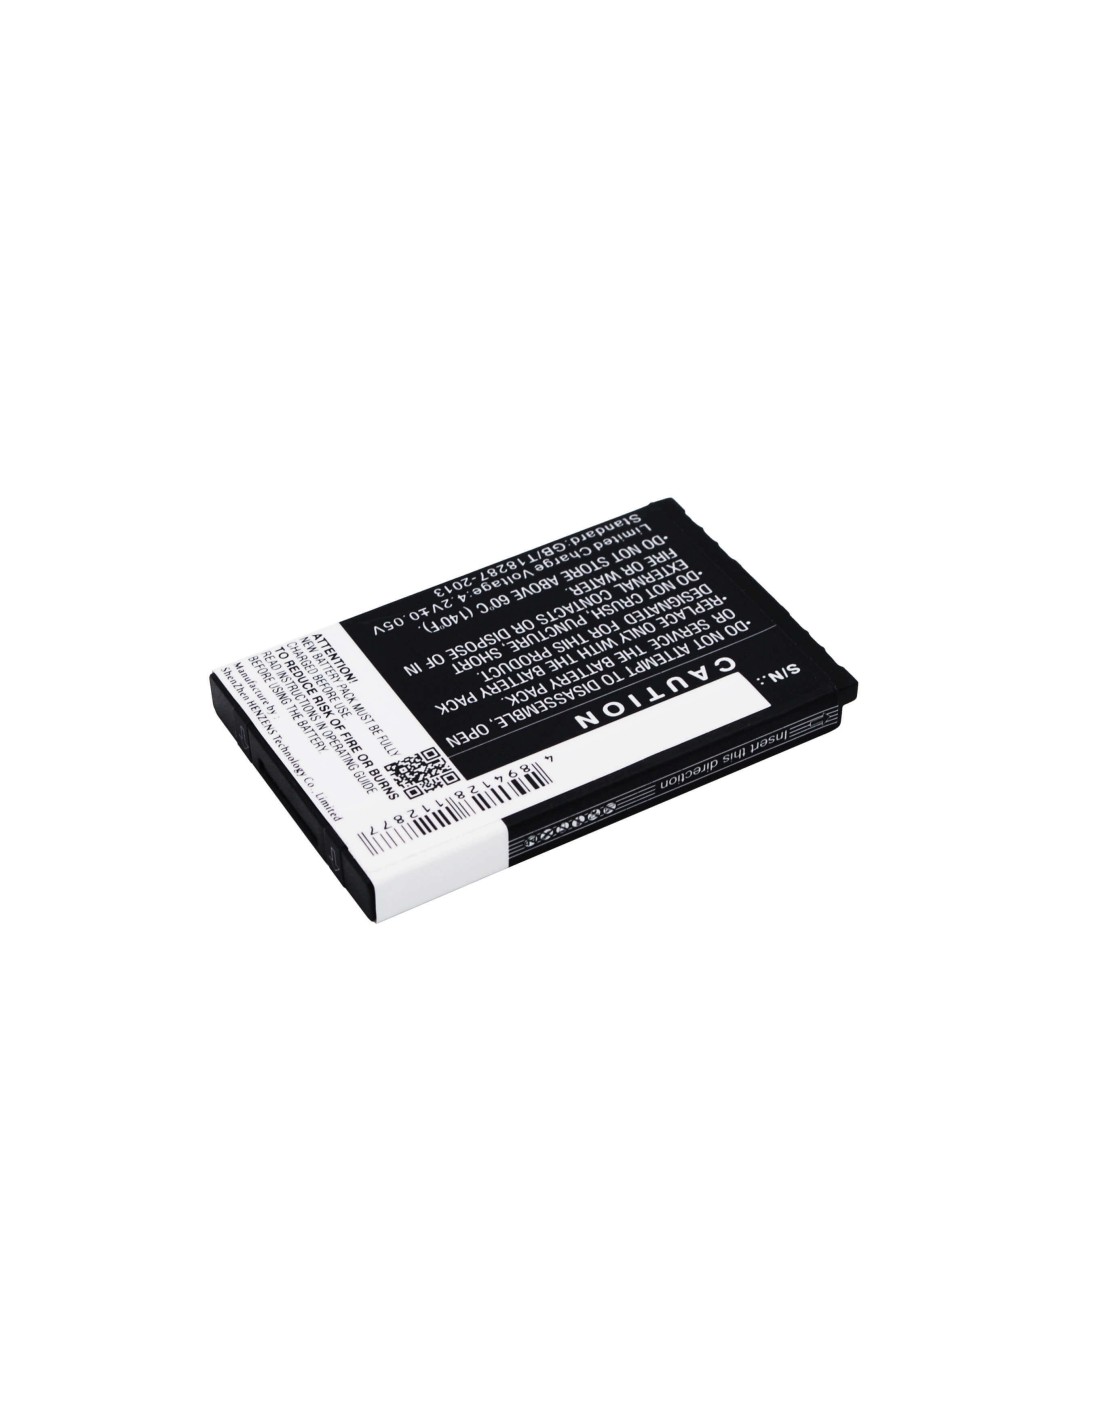 Battery for NGM W13-NM8819, Clio, Dandy 3.7V, 1000mAh - 3.70Wh